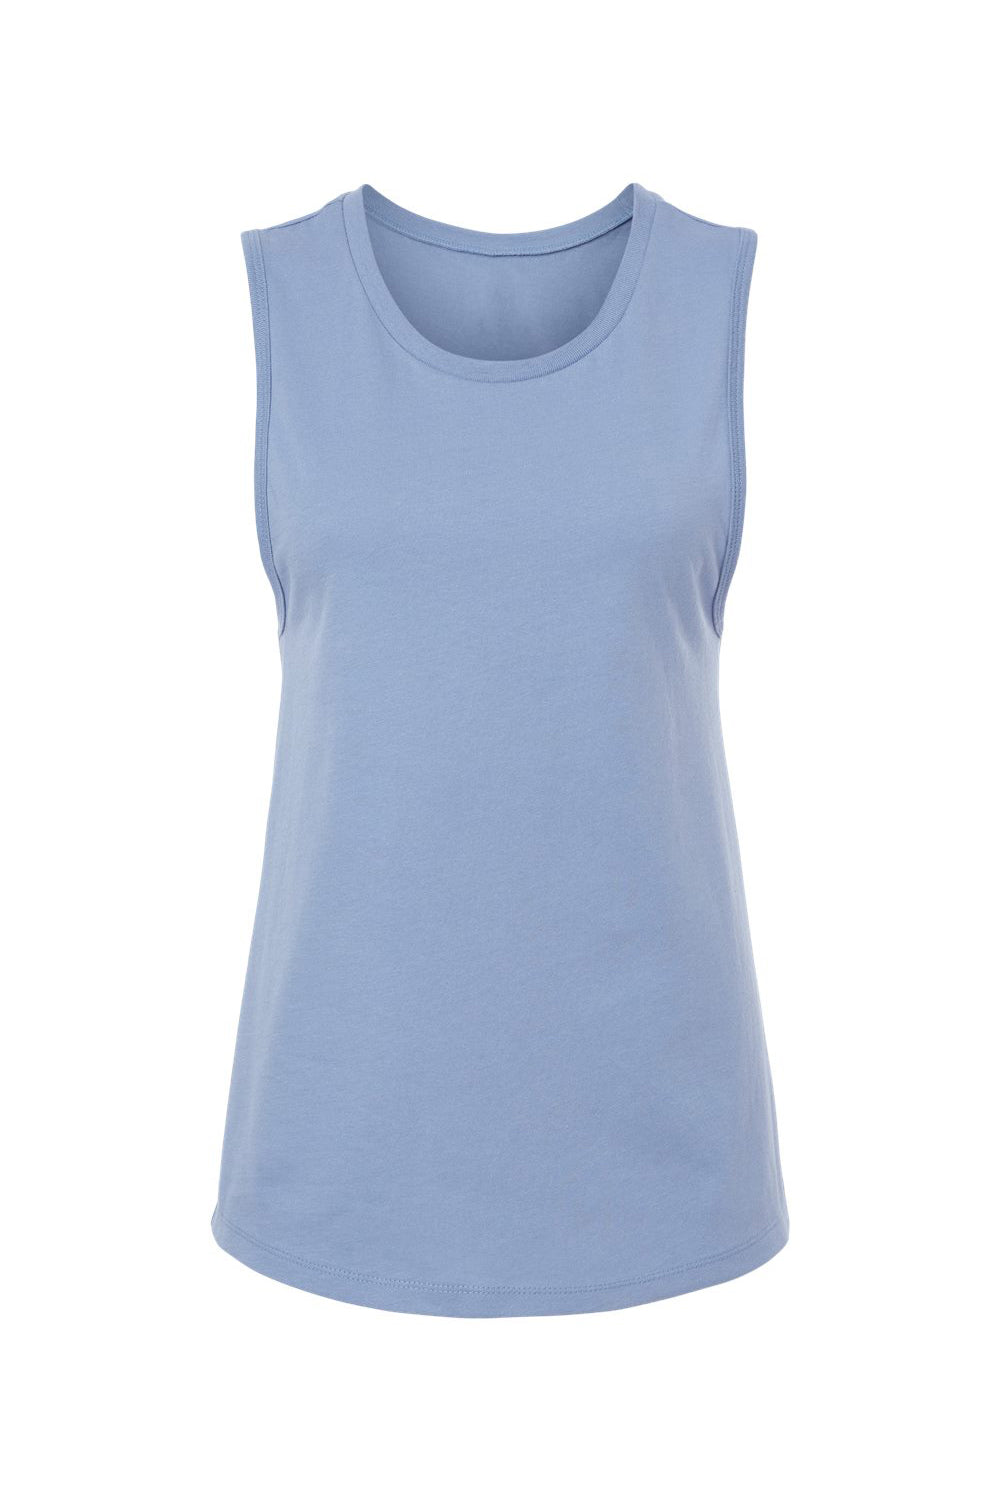 Bella + Canvas BC6003/B6003/6003 Womens Jersey Muscle Tank Top Lavender Blue Flat Front